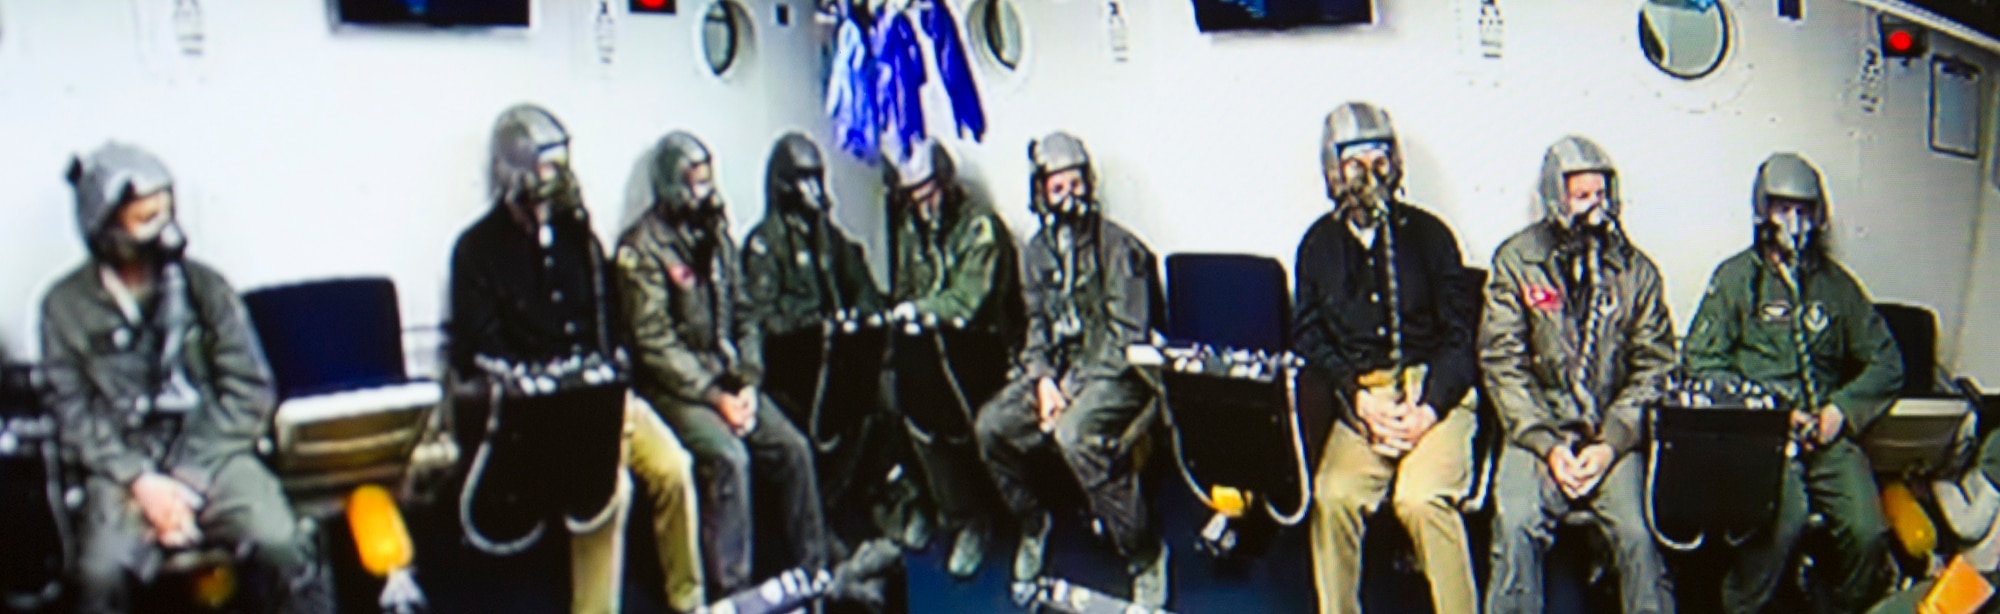 Civilian and military students await the beginning of their altitude training course while inside an enclosed chamber March 16, 2017, at Joint Base Andrews, Md. All were undergoing refresher training, required every five years, to test their ability to identify how their bodies reacted in an environment with varying levels of air pressure. (U.S. Air Force photo by Staff Sgt. Joe Yanik)